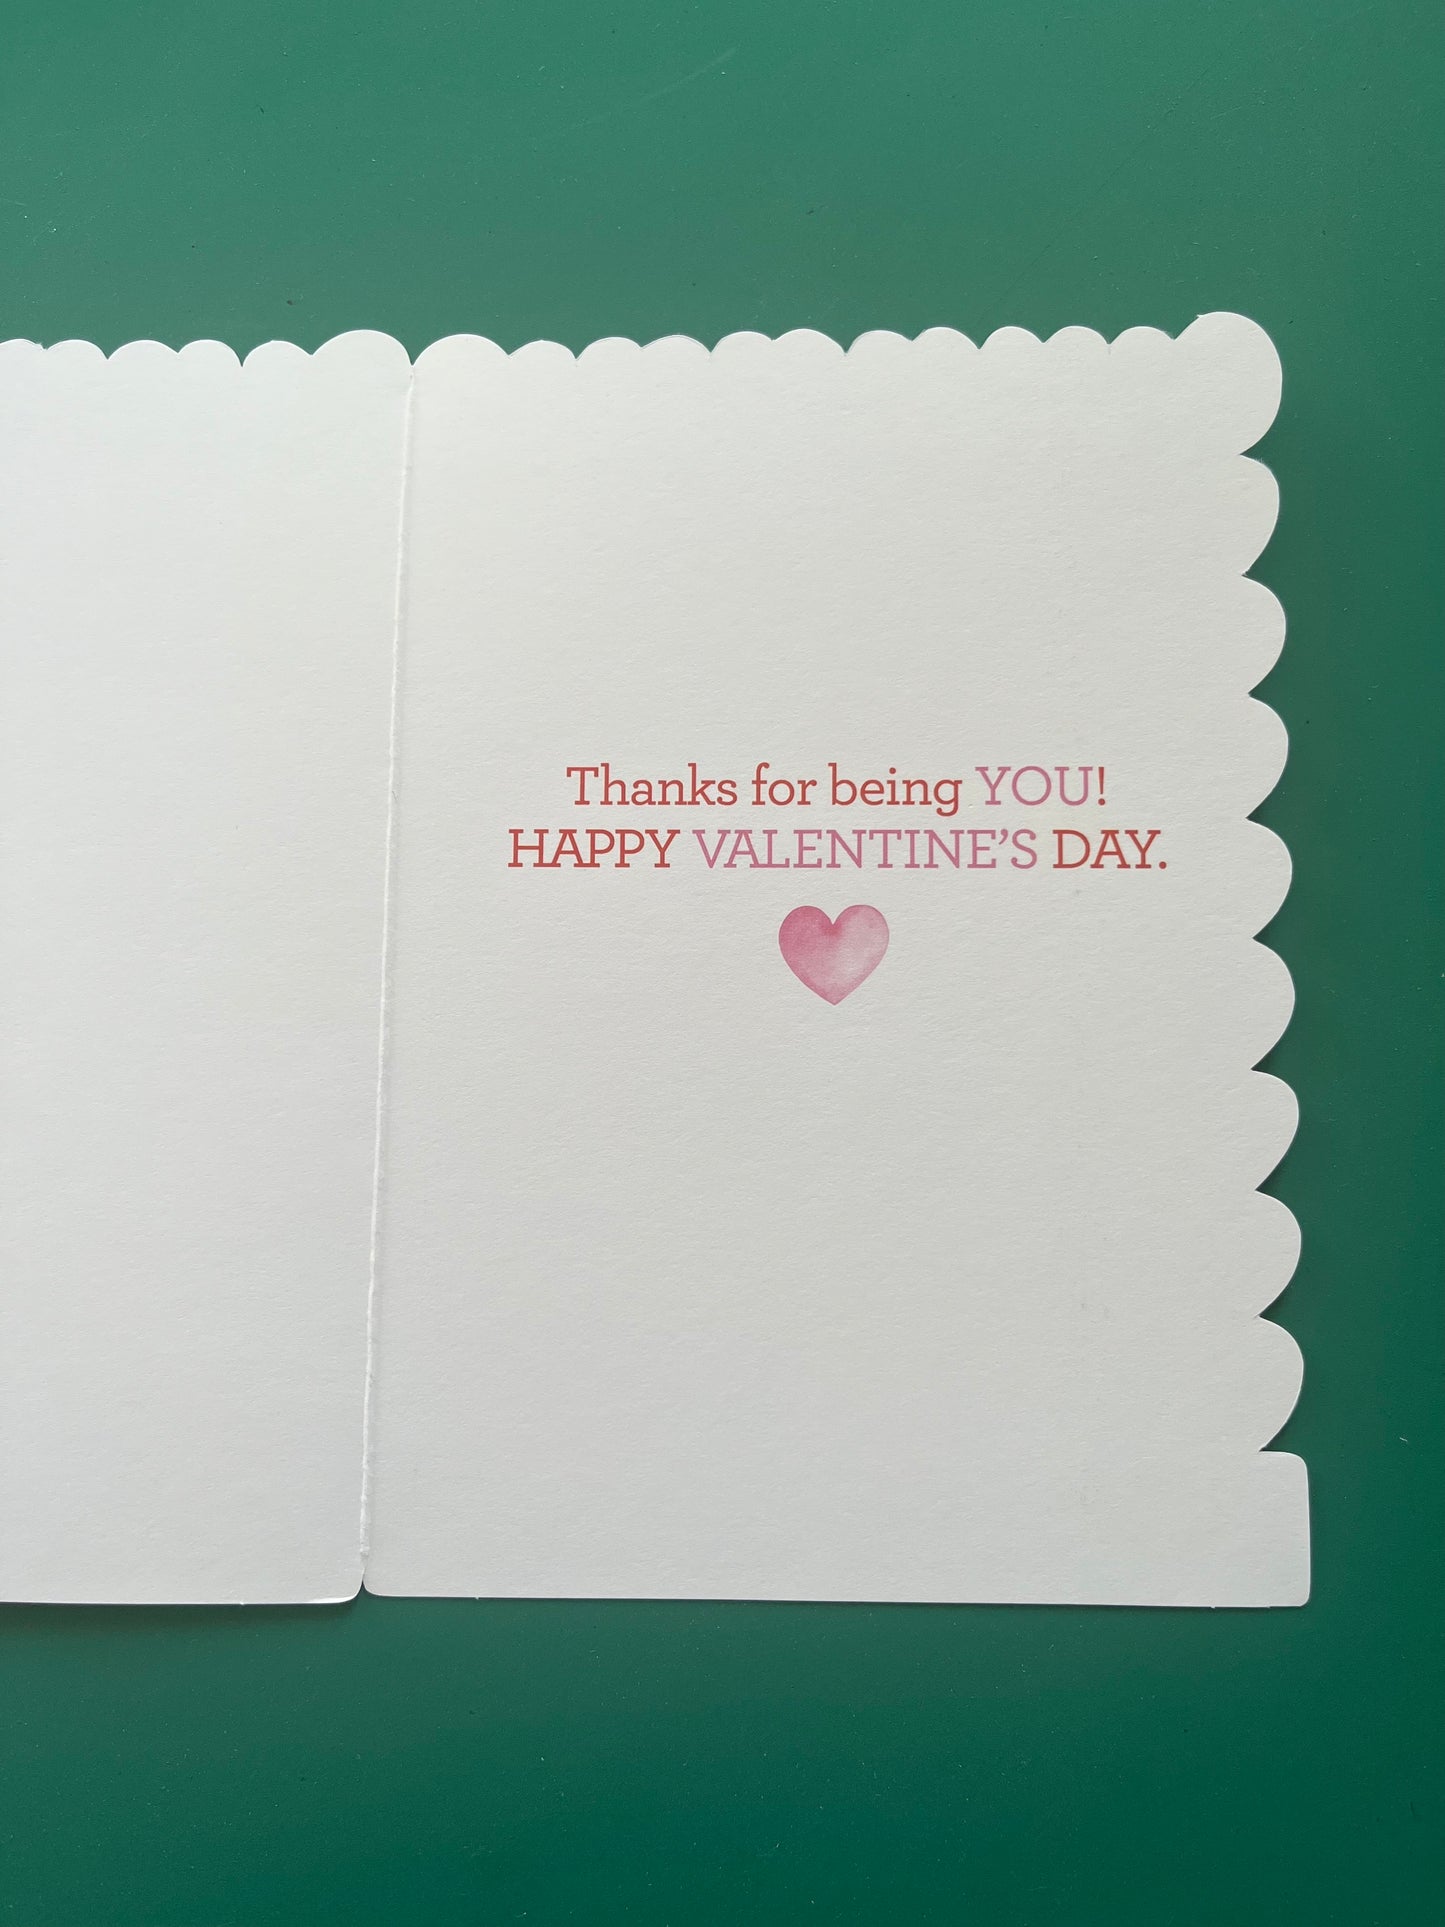 One in a Million Valentine's Greeting Card